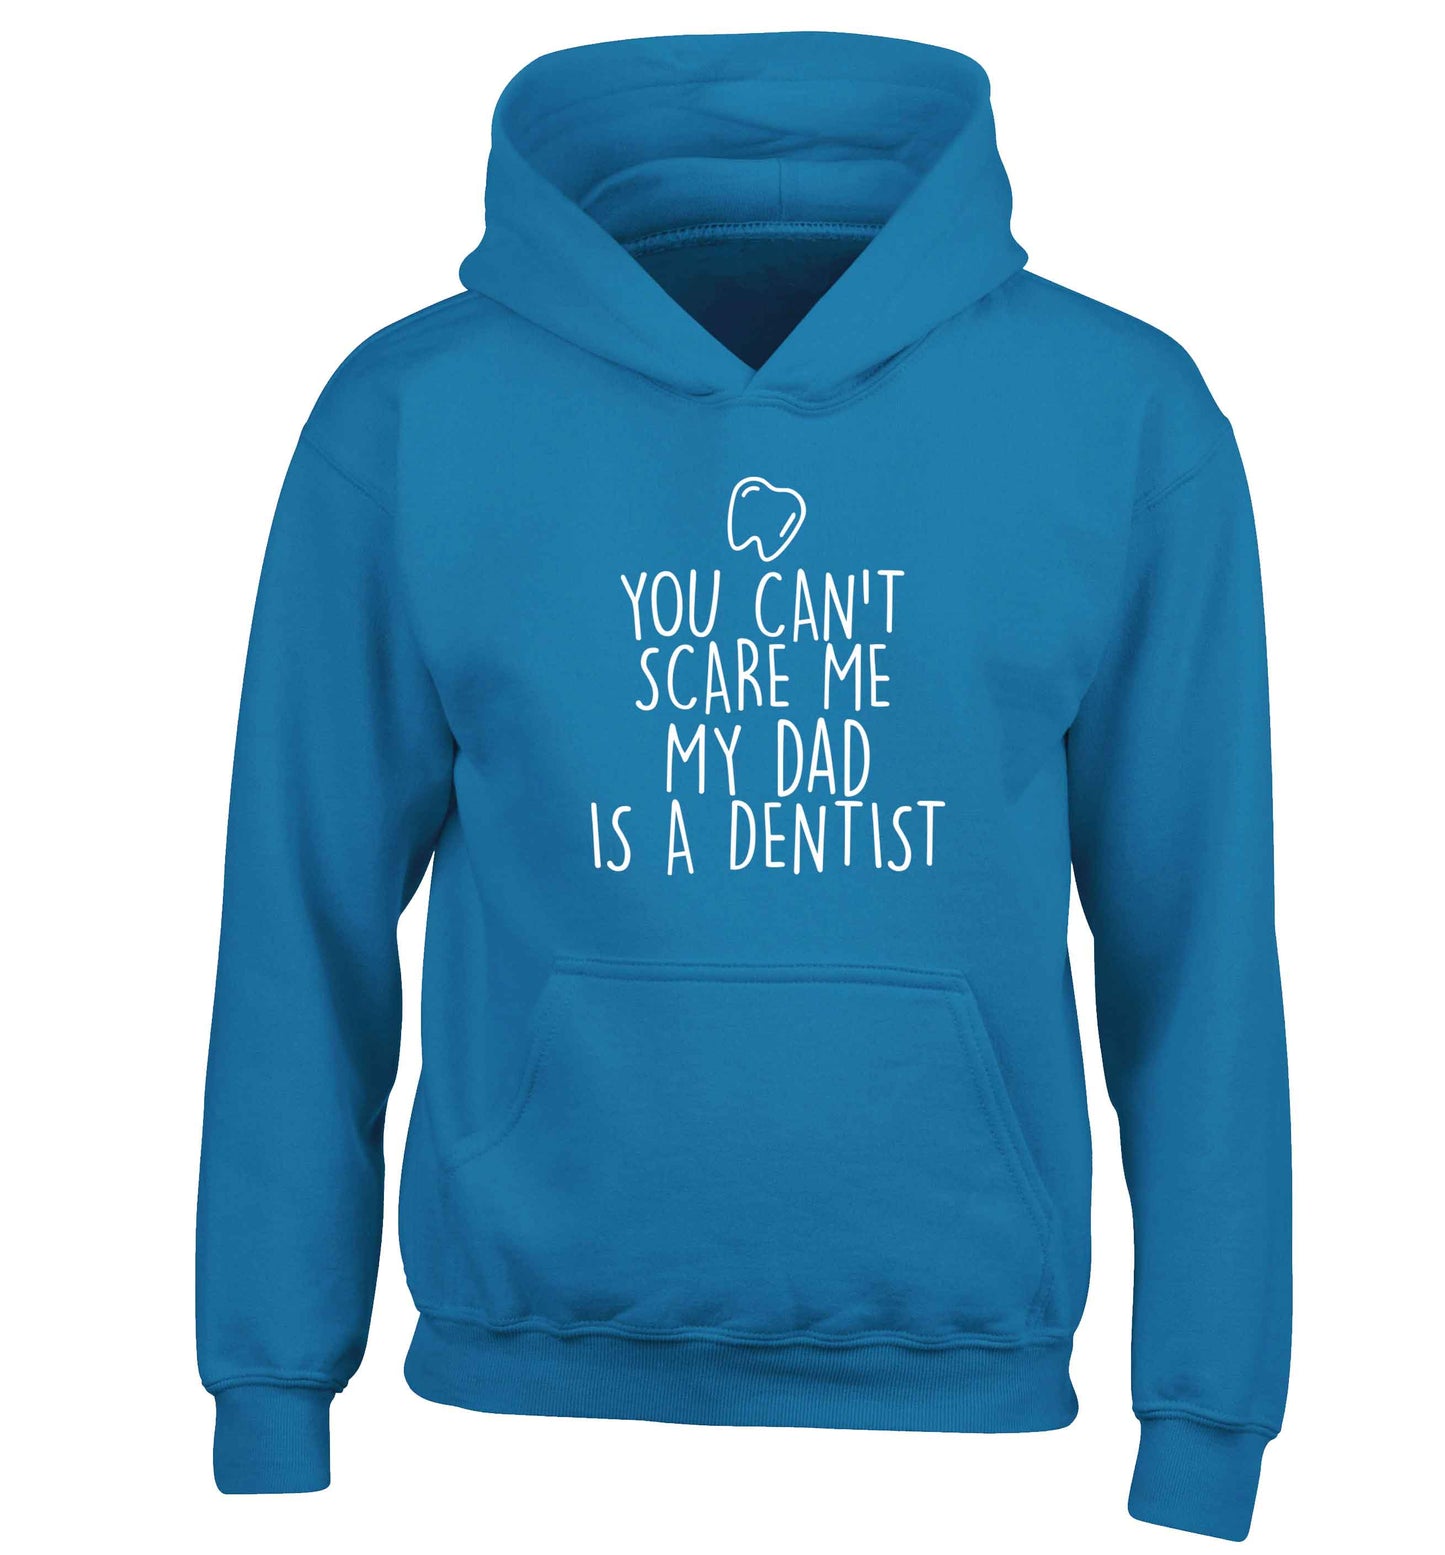 You can't scare me my dad is a dentist children's blue hoodie 12-13 Years